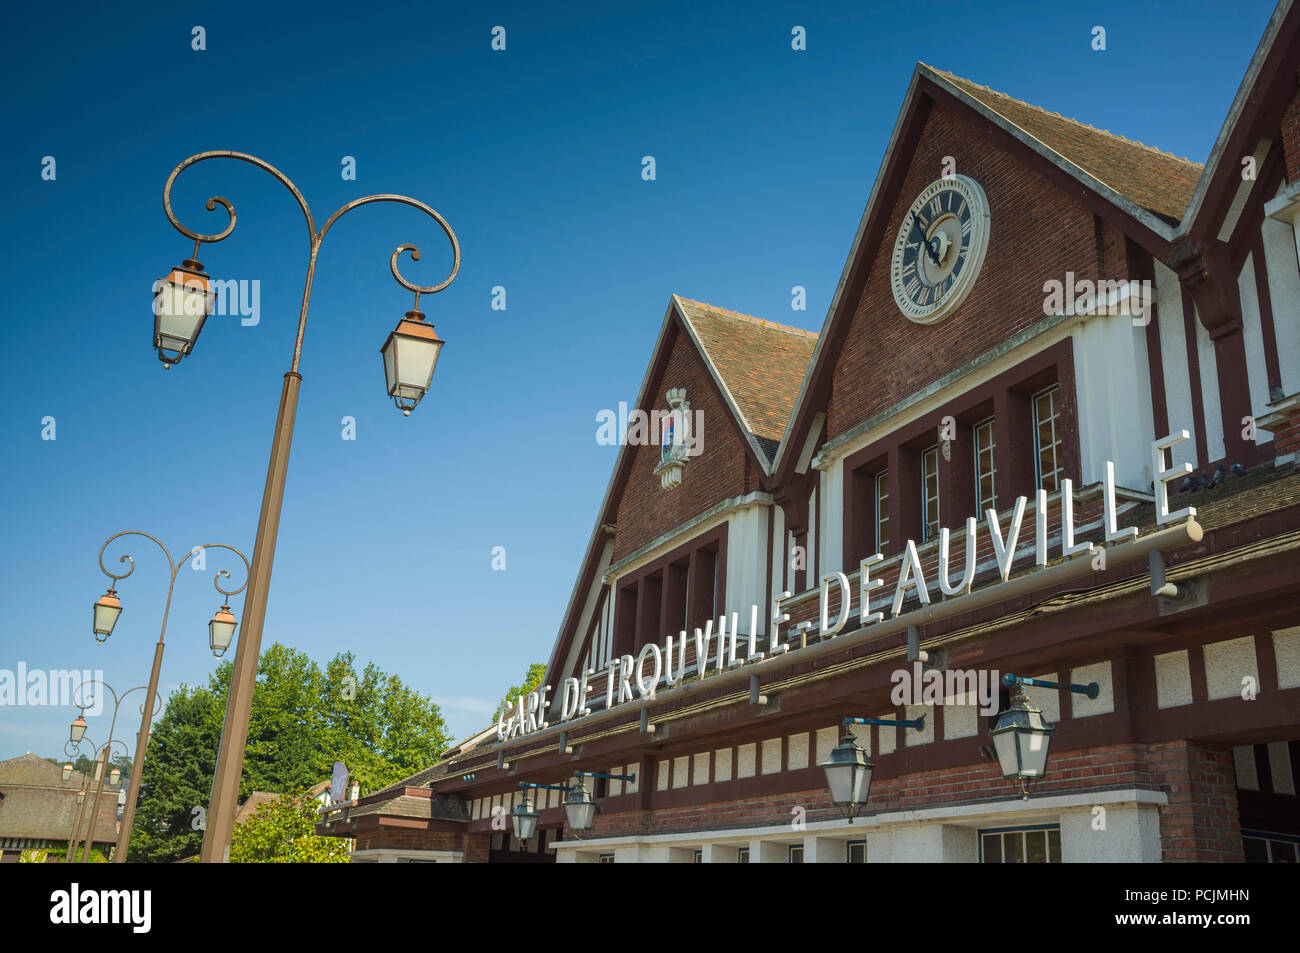 The stylish facade of the railway station or Gare de Trouville Deauville at Trouville-Deauville, Normandy, France. Stock Photo